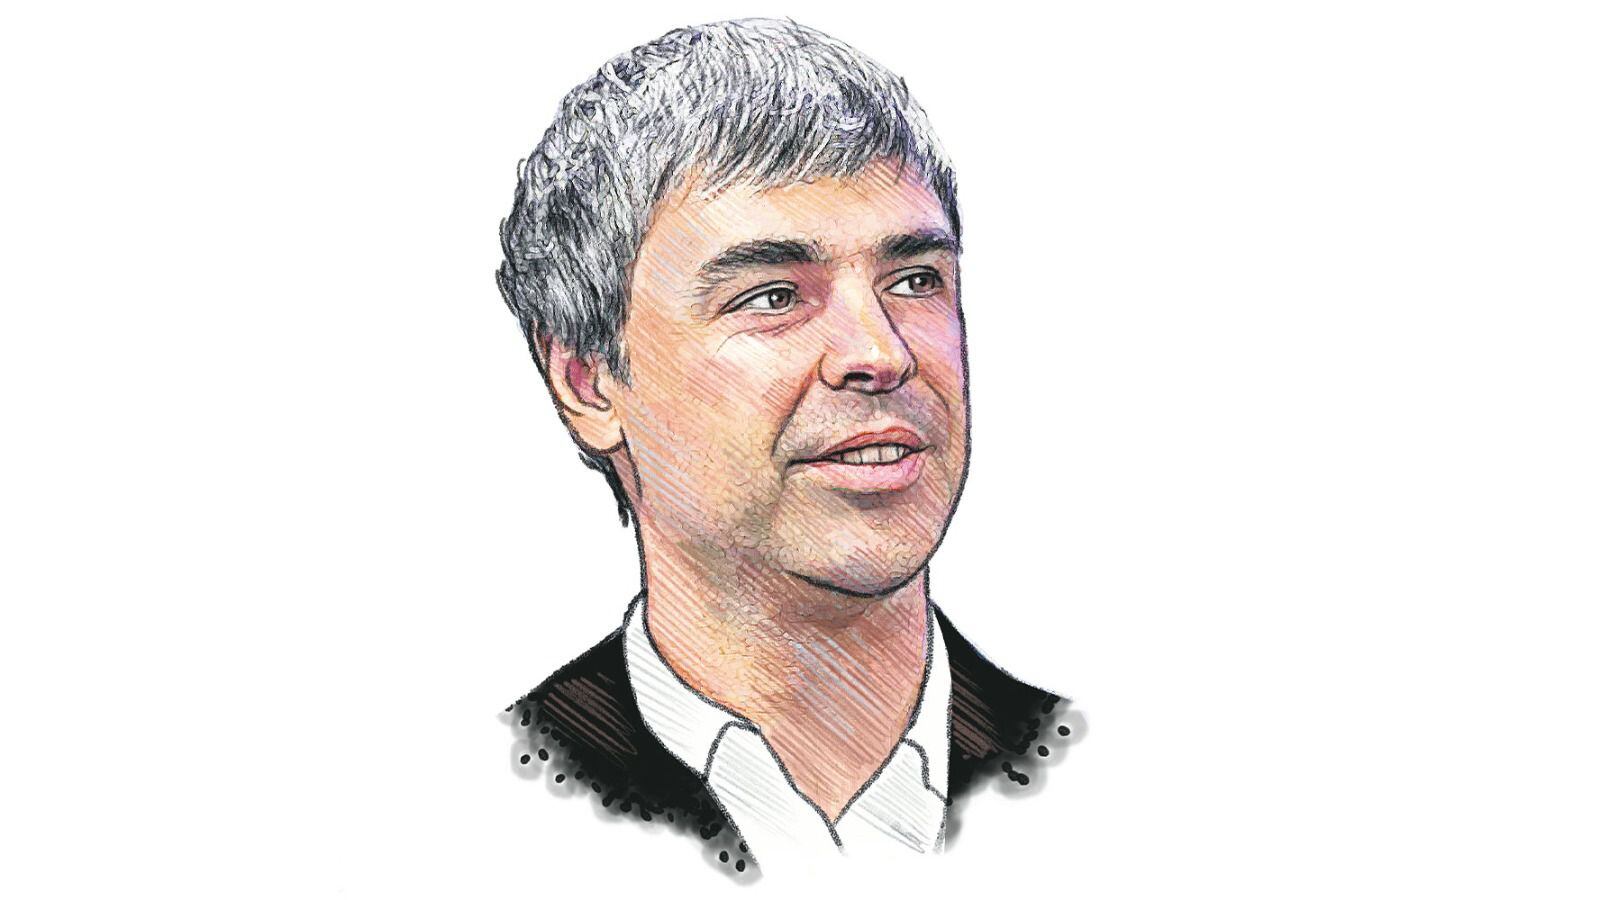 Larry Page.